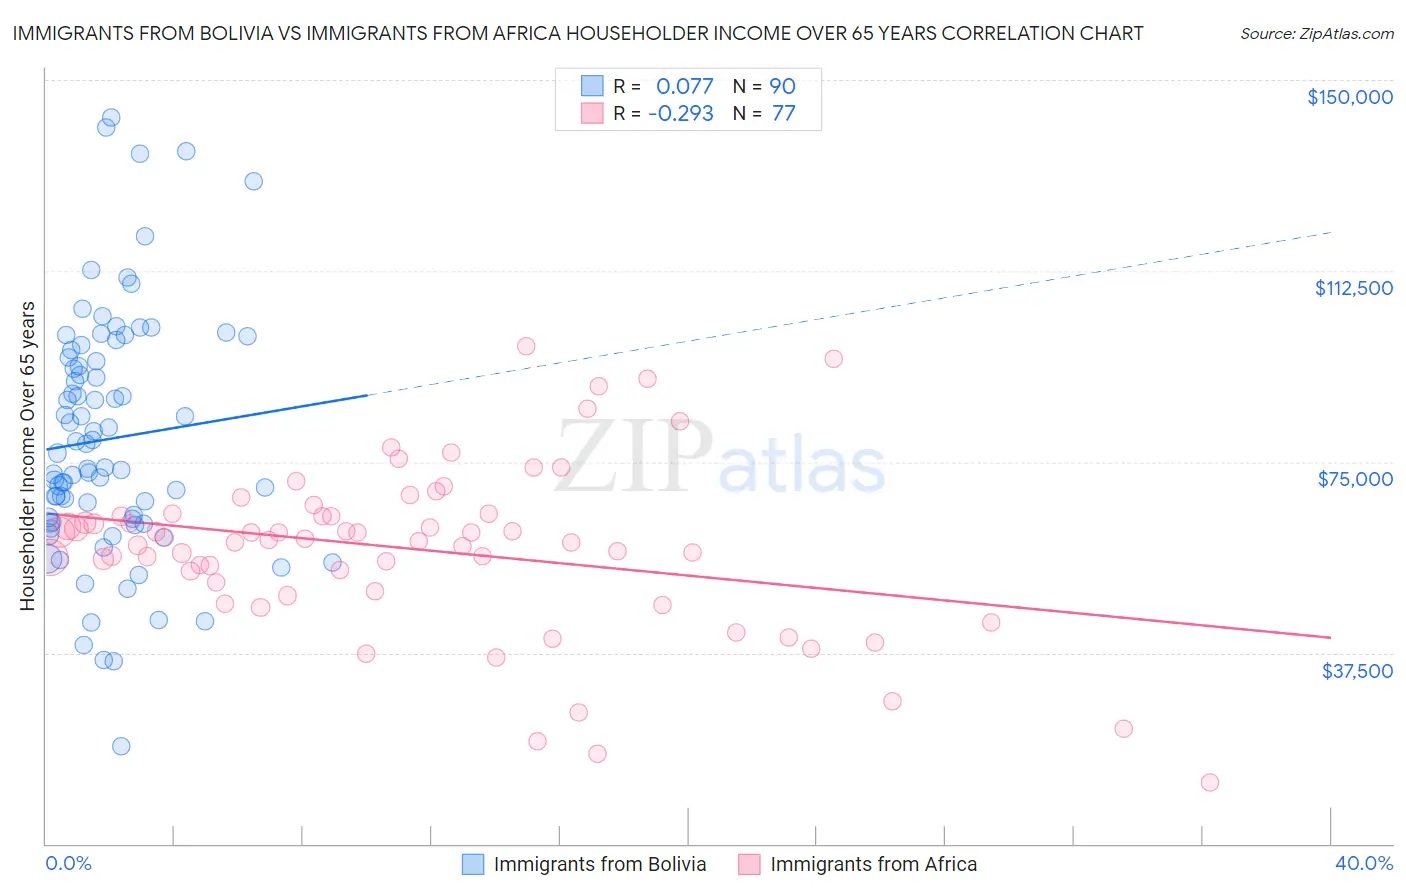 Immigrants from Bolivia vs Immigrants from Africa Householder Income Over 65 years